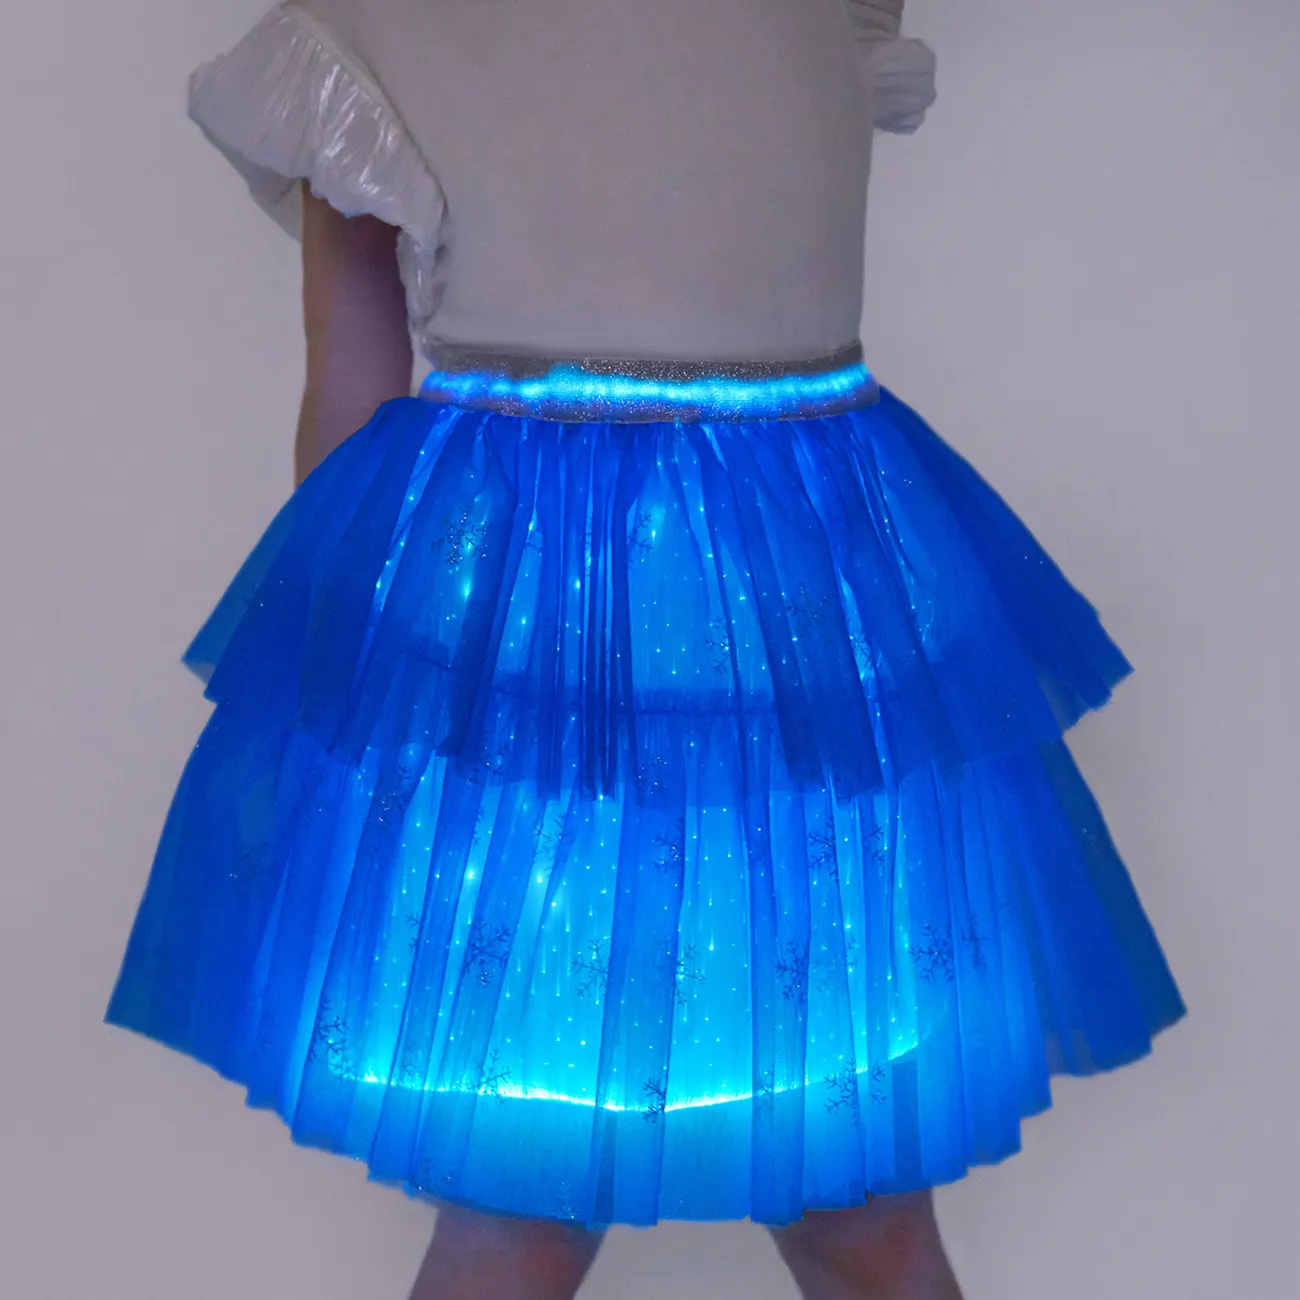 Go-Glow Light Up Blue Skirt with Snowflake Glitter Including Controller (Built-In Battery) Blue big image 1